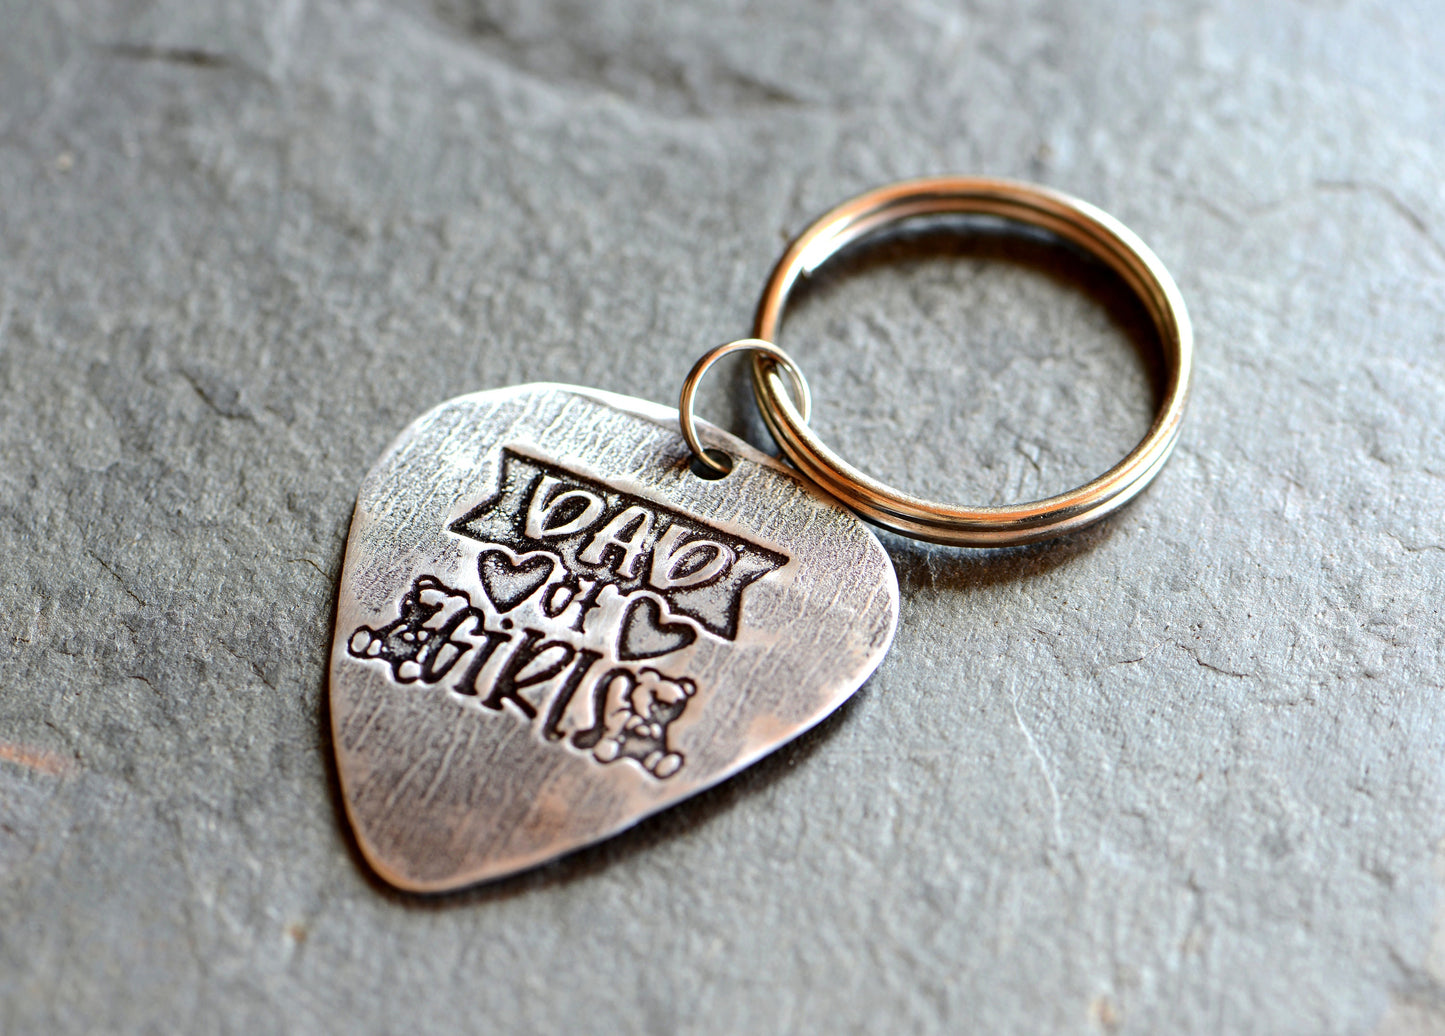 Sterling silver guitar pick keychain stamped with Dad of Girls